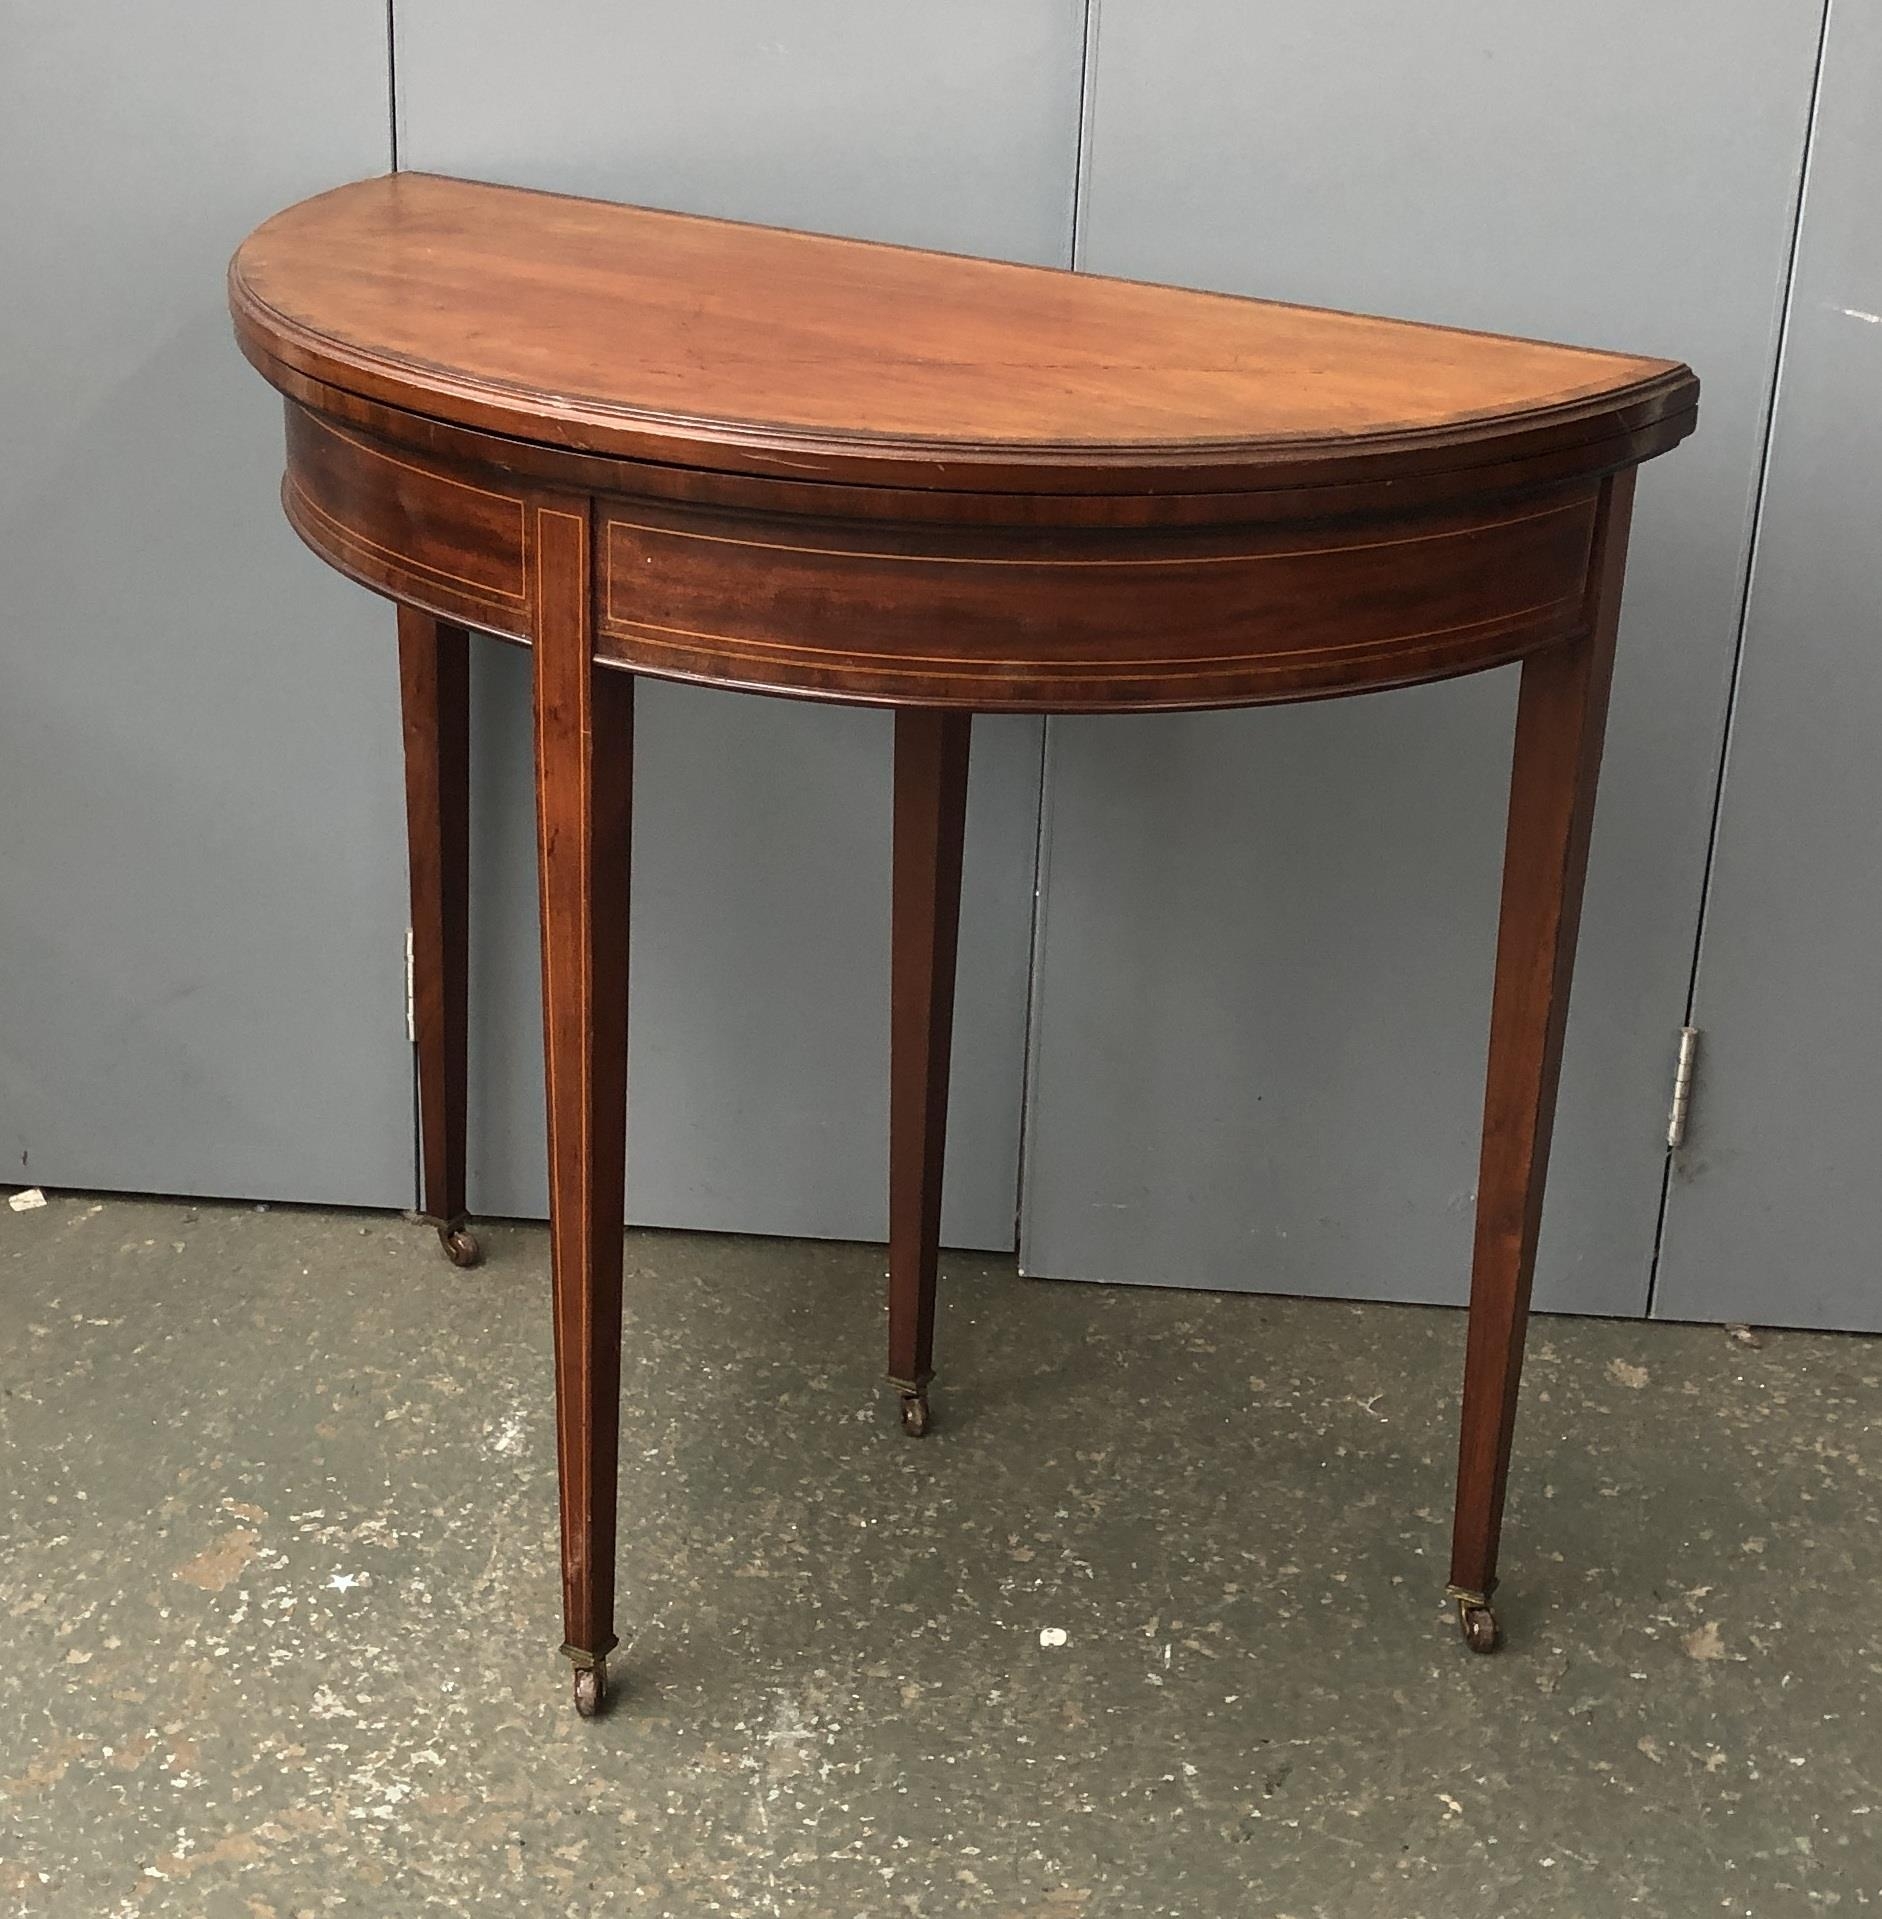 A 19th century demilune card table, on square tapered legs with casters, 84x42x74cmH